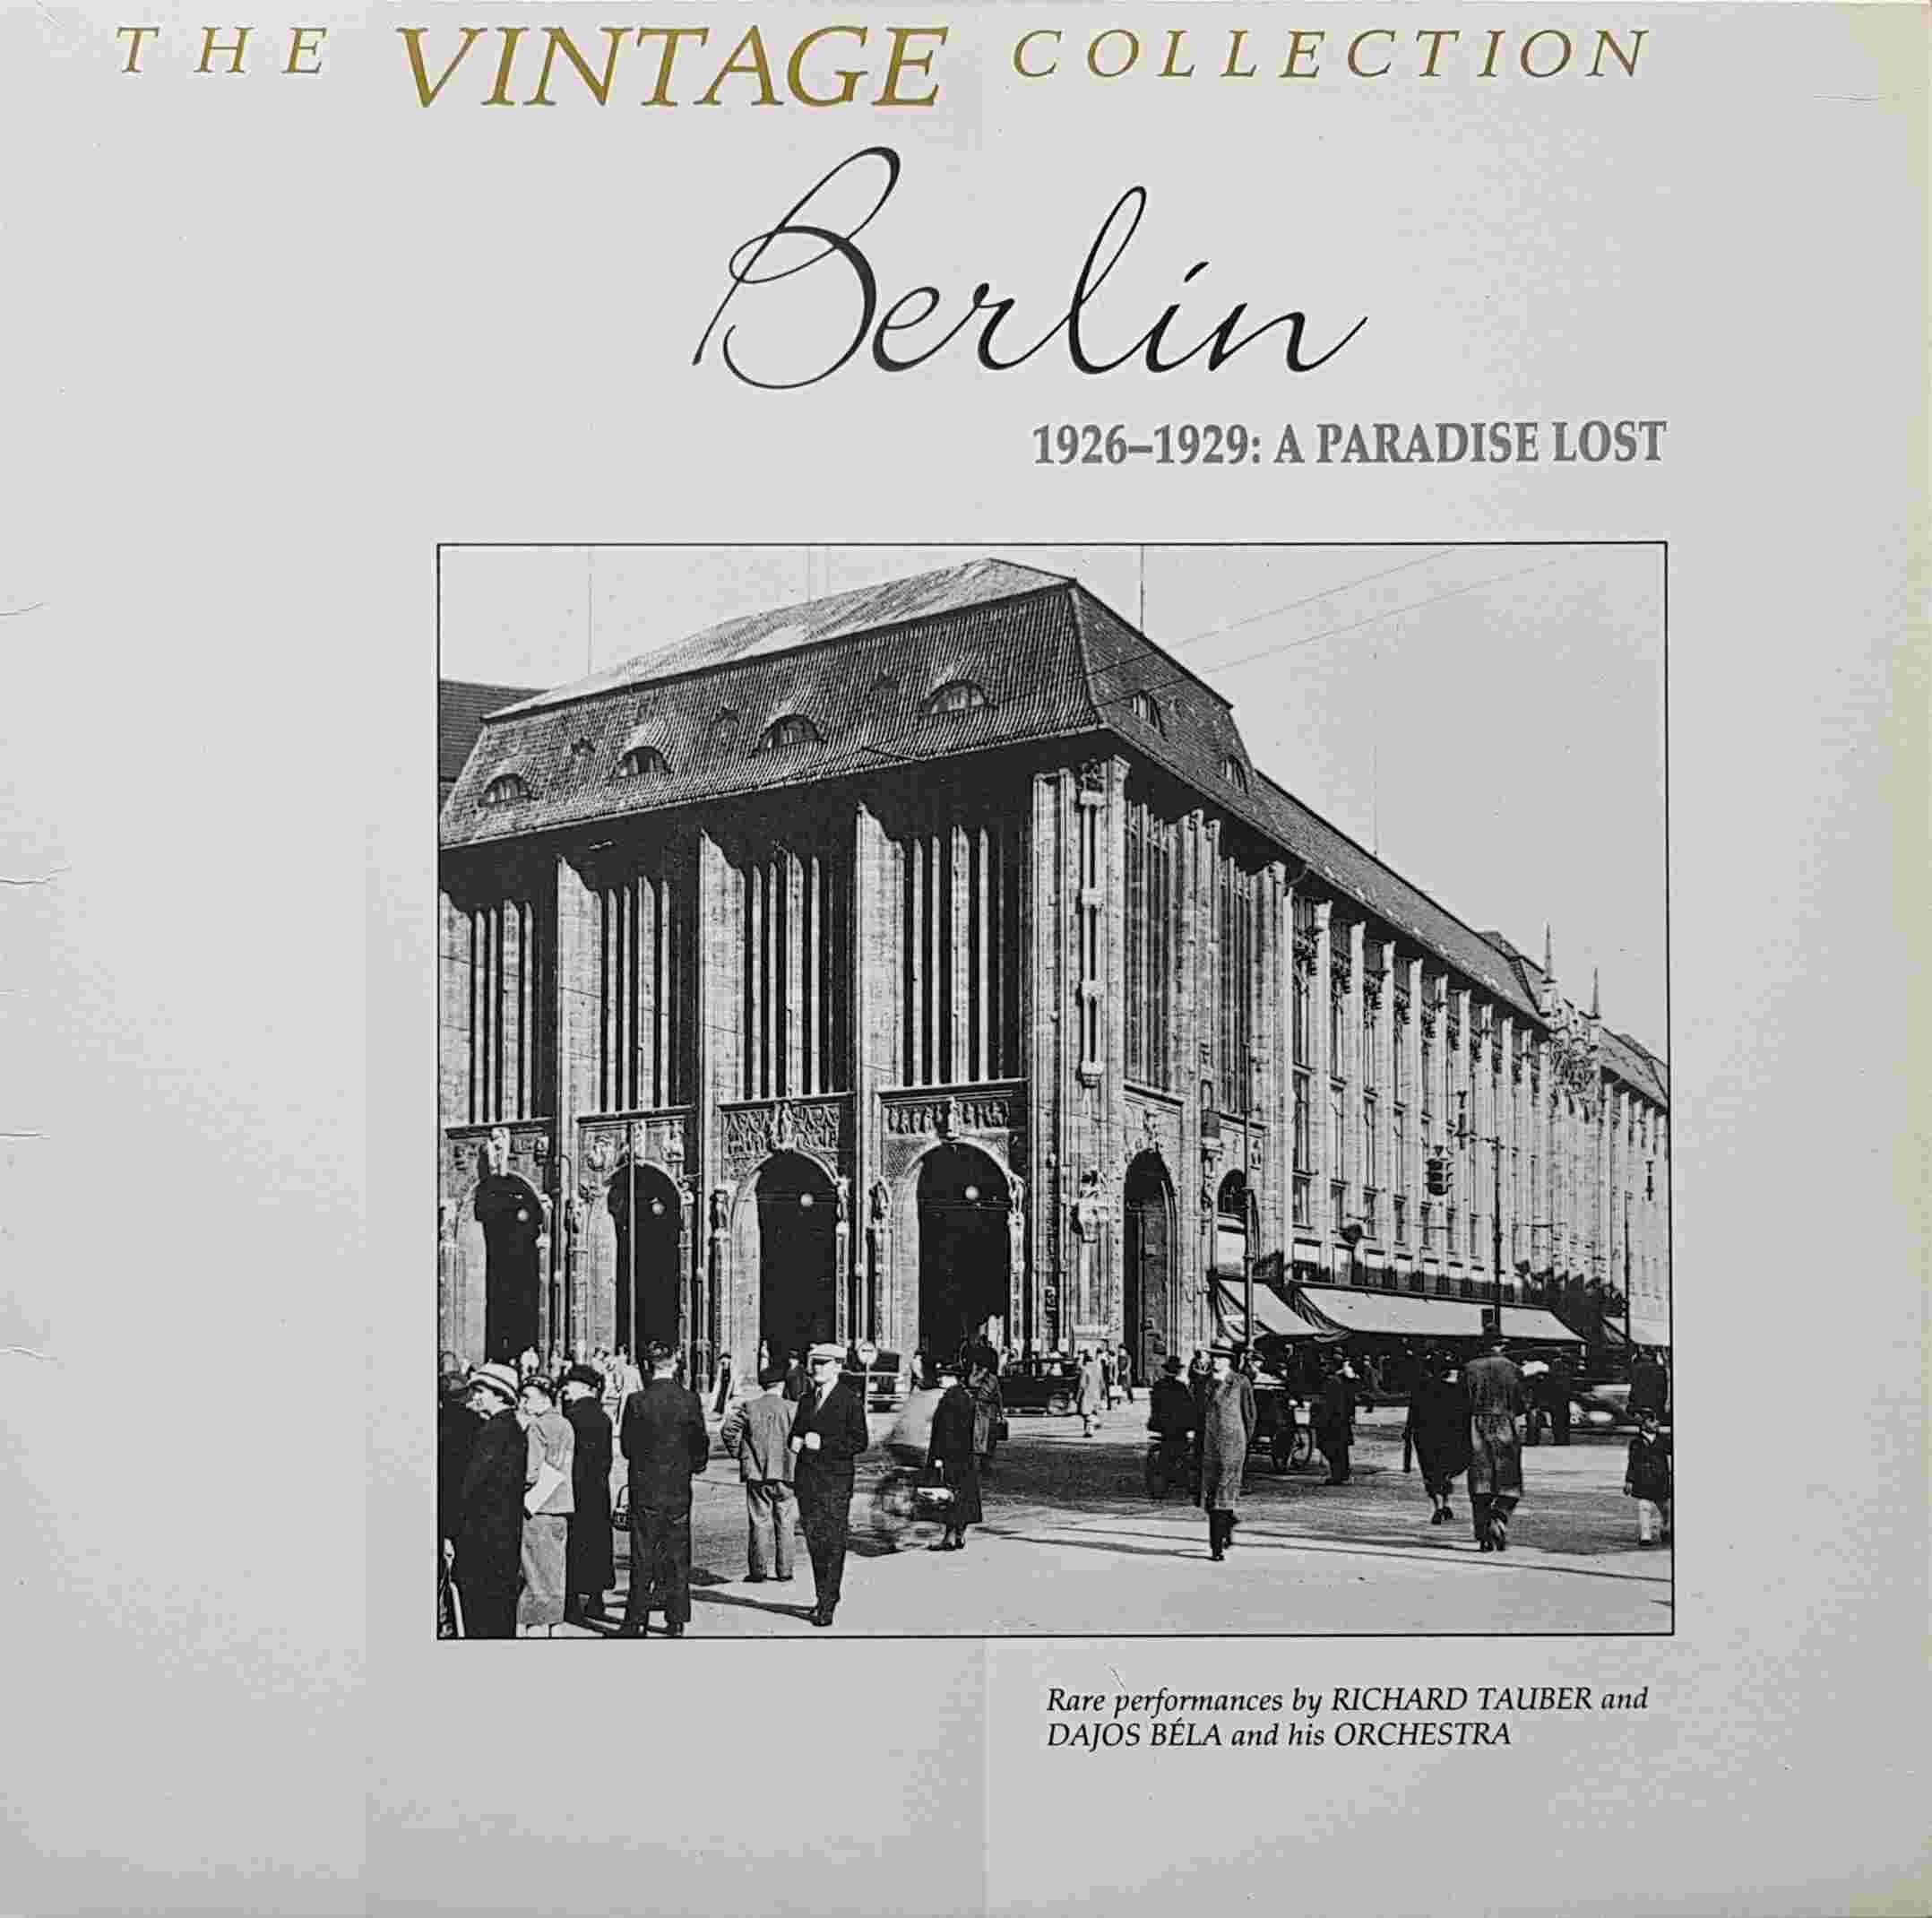 Picture of REH 754 The vintage collection - Berlin 1926 - 1929 by artist Various from the BBC albums - Records and Tapes library